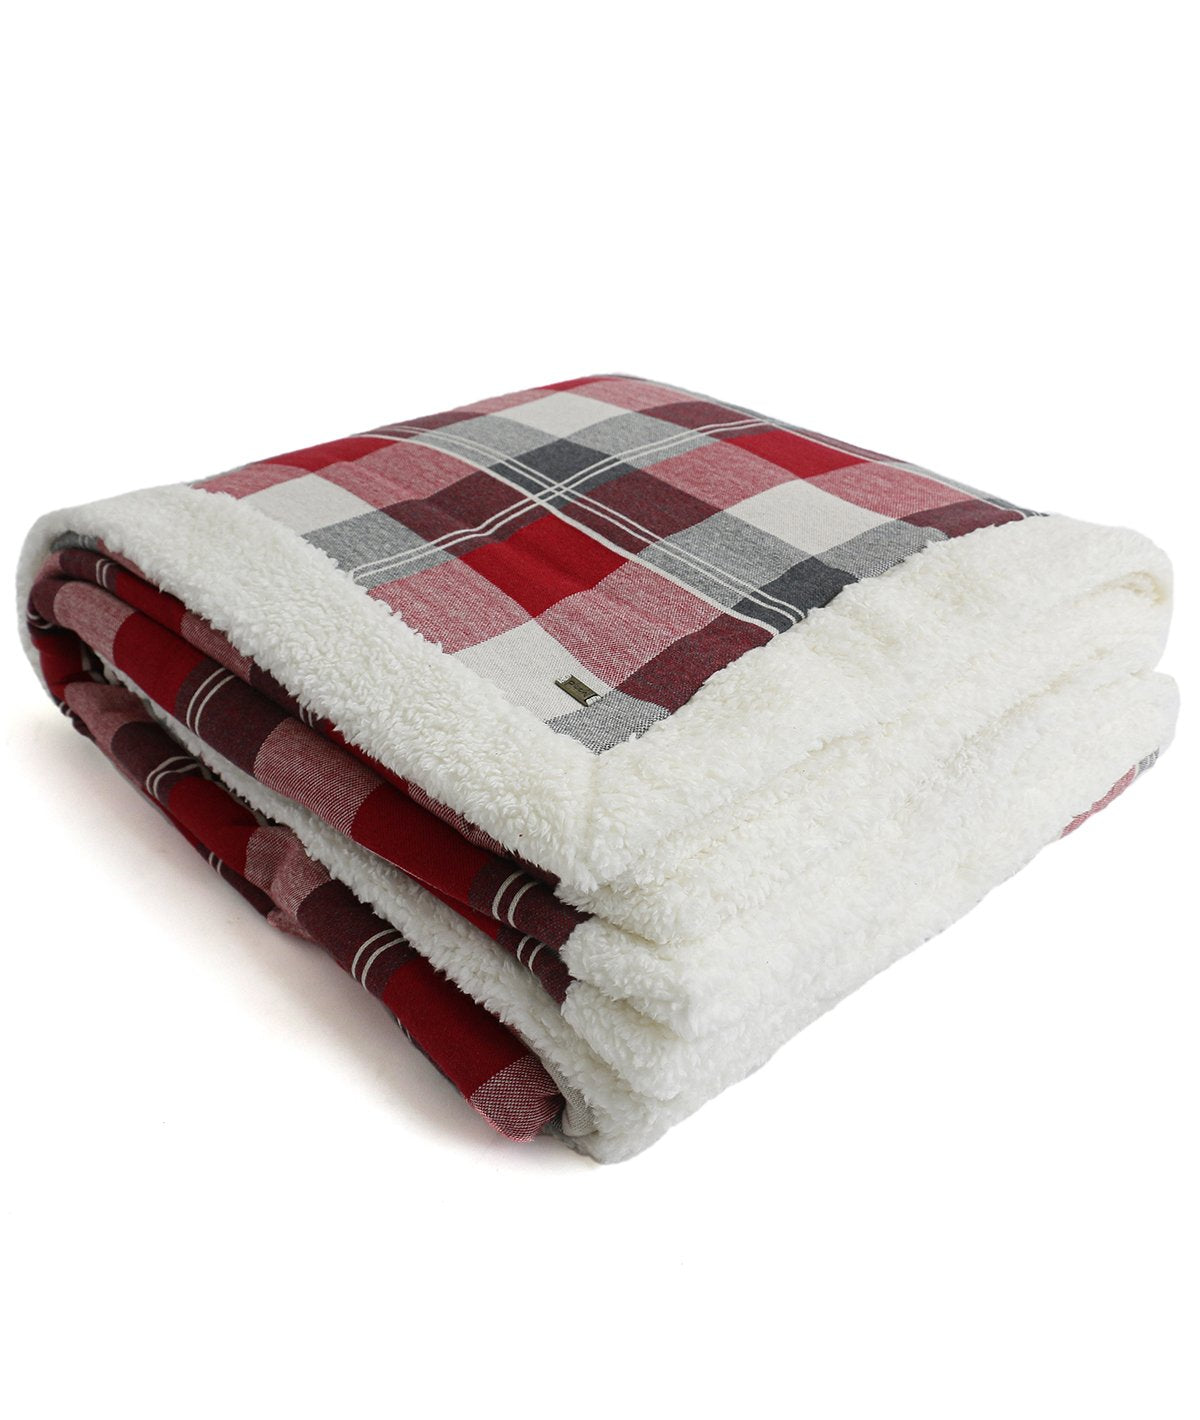 Azzo - Multicolor Cotton Knitted Double Bed Blanket layered with Warm Sherpa Fabric